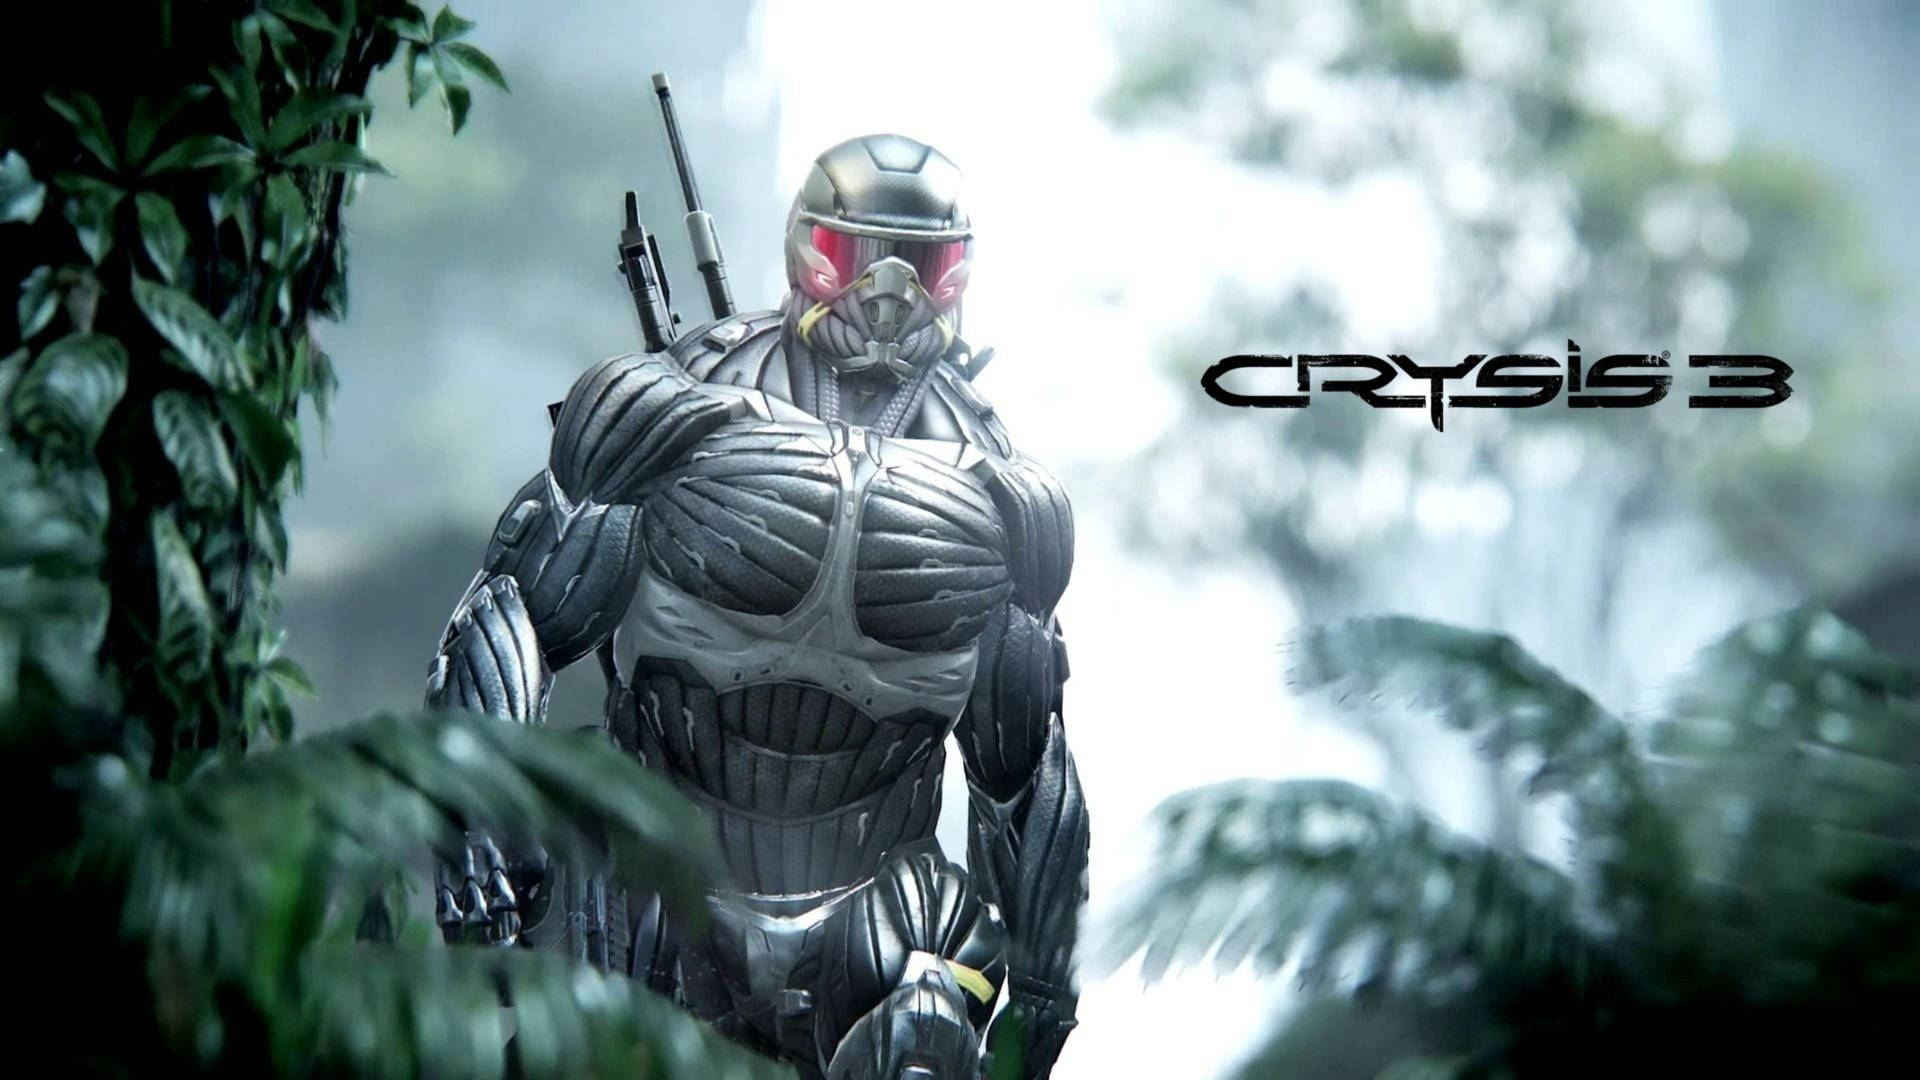 Crysis 3 Emerges From Forest 4k Wallpaper